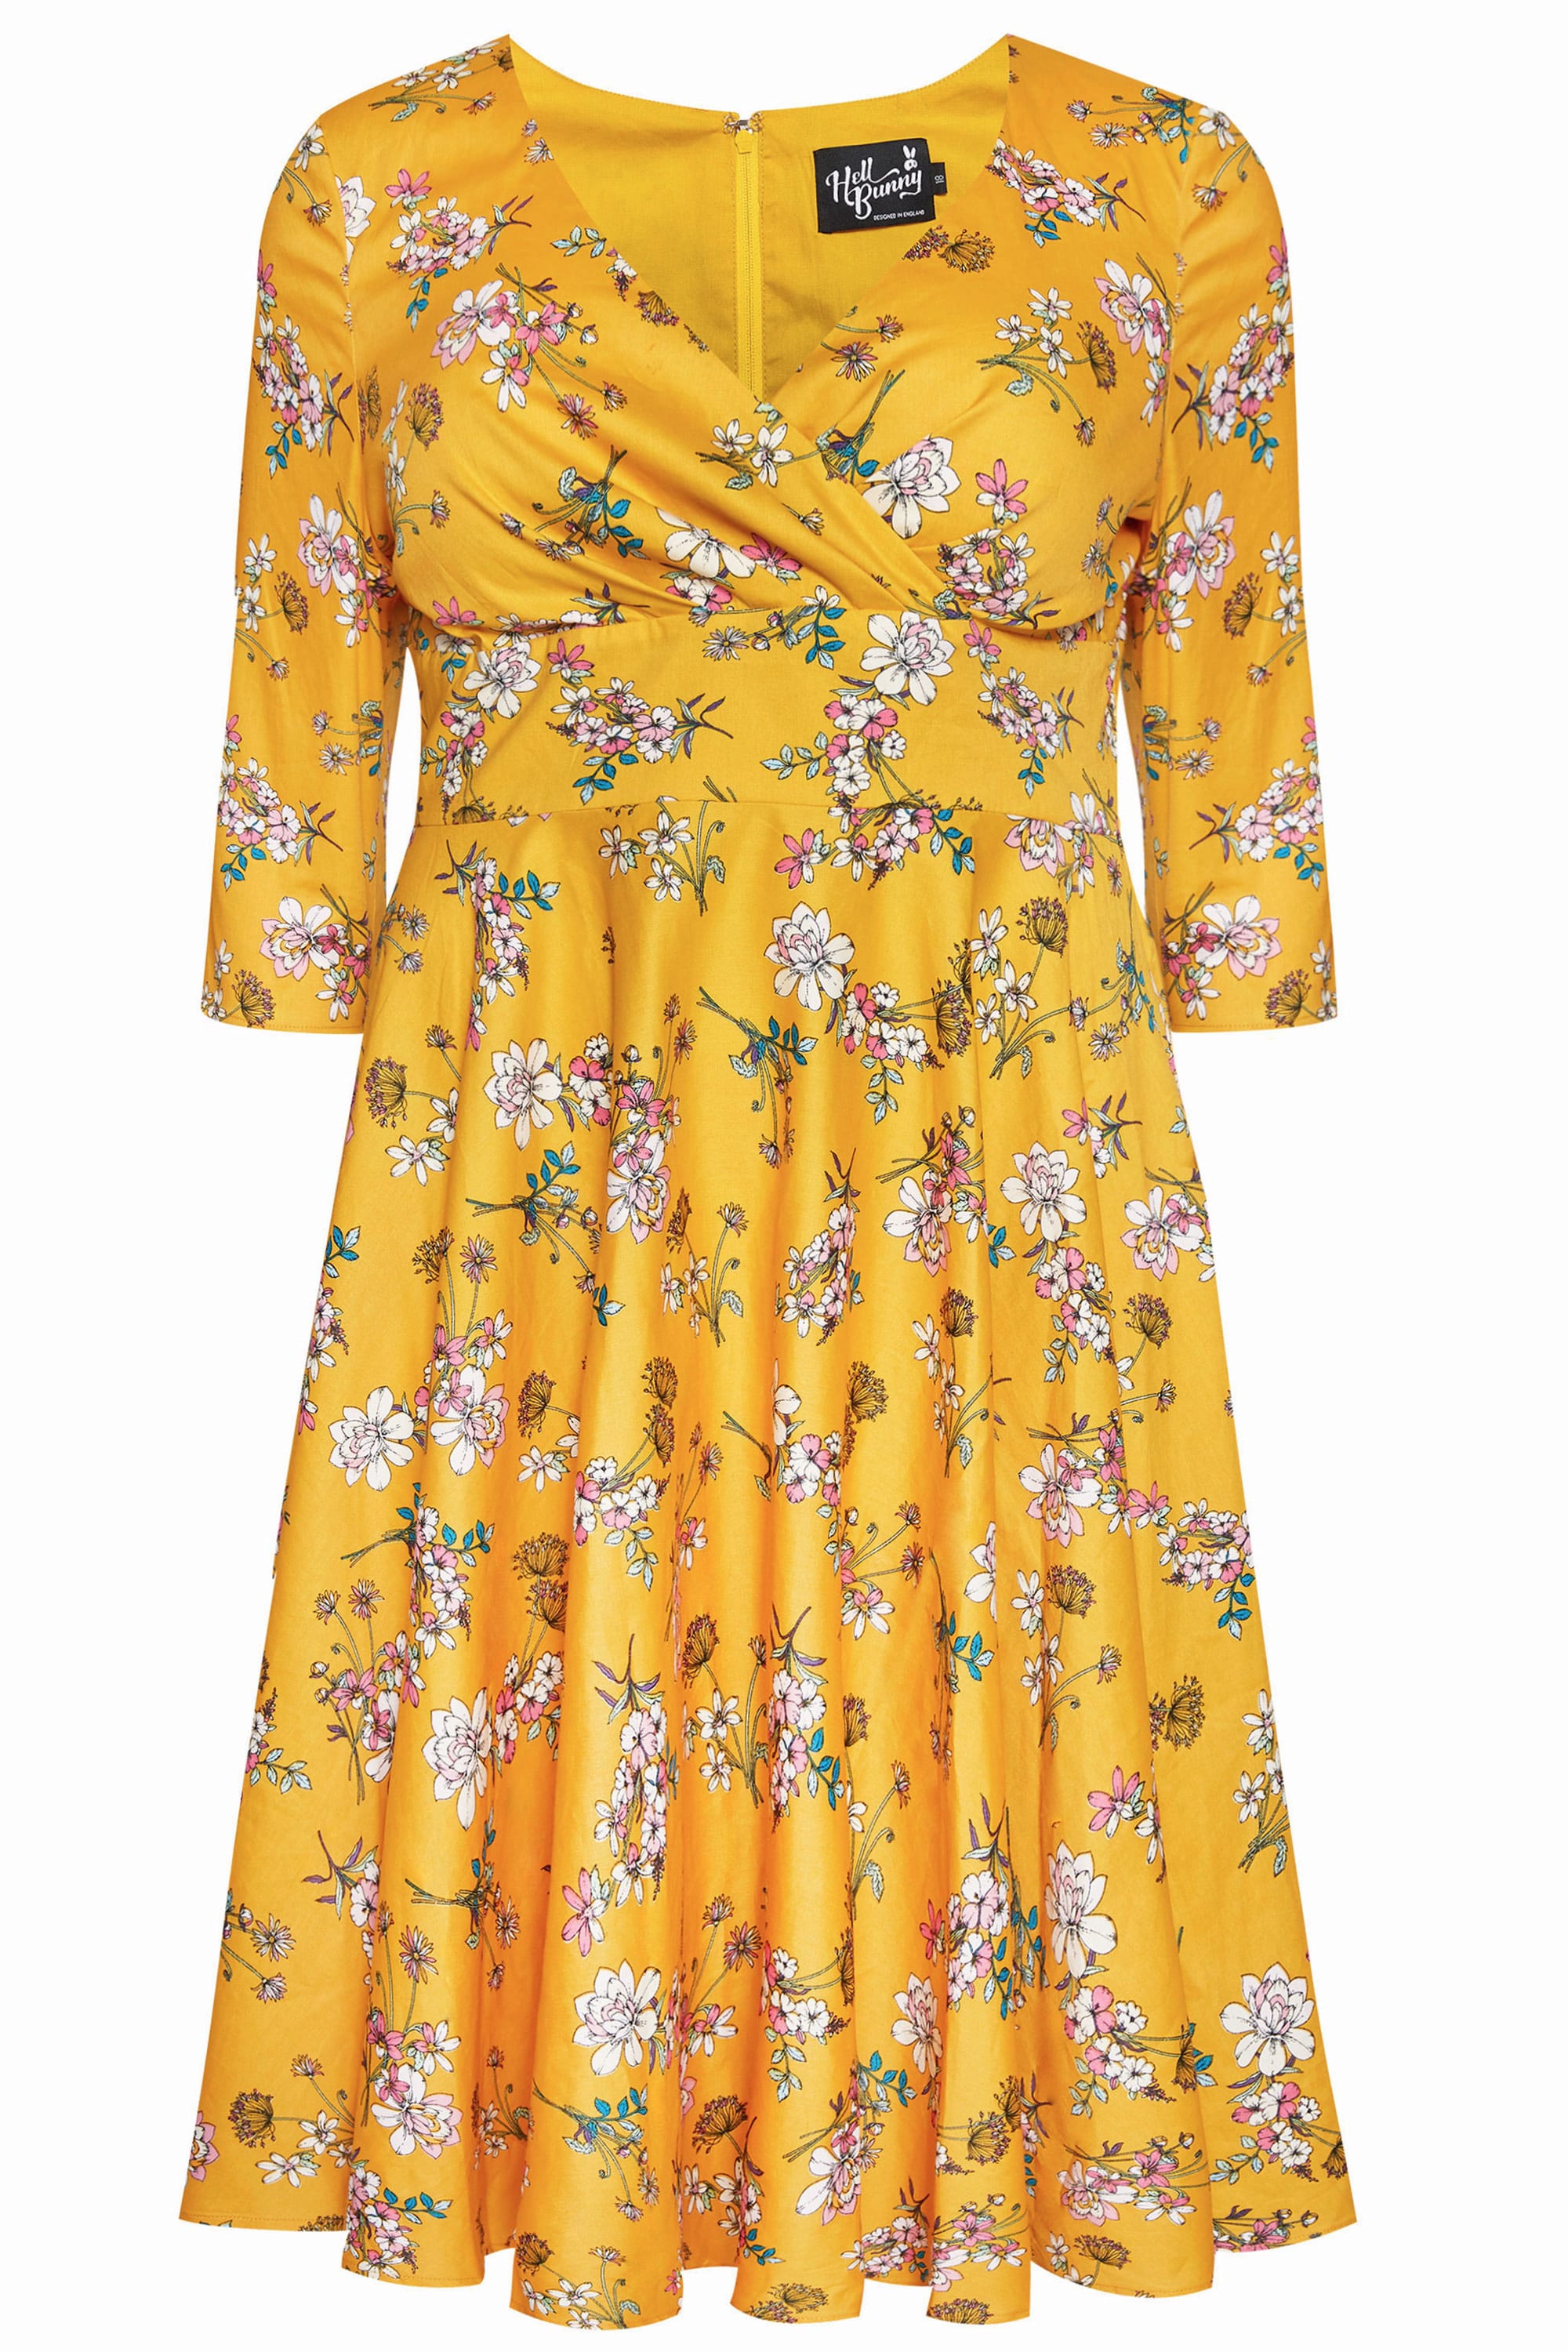 HELL BUNNY Yellow Floral Muriel Dress | Sizes 16-36 | Yours Clothing